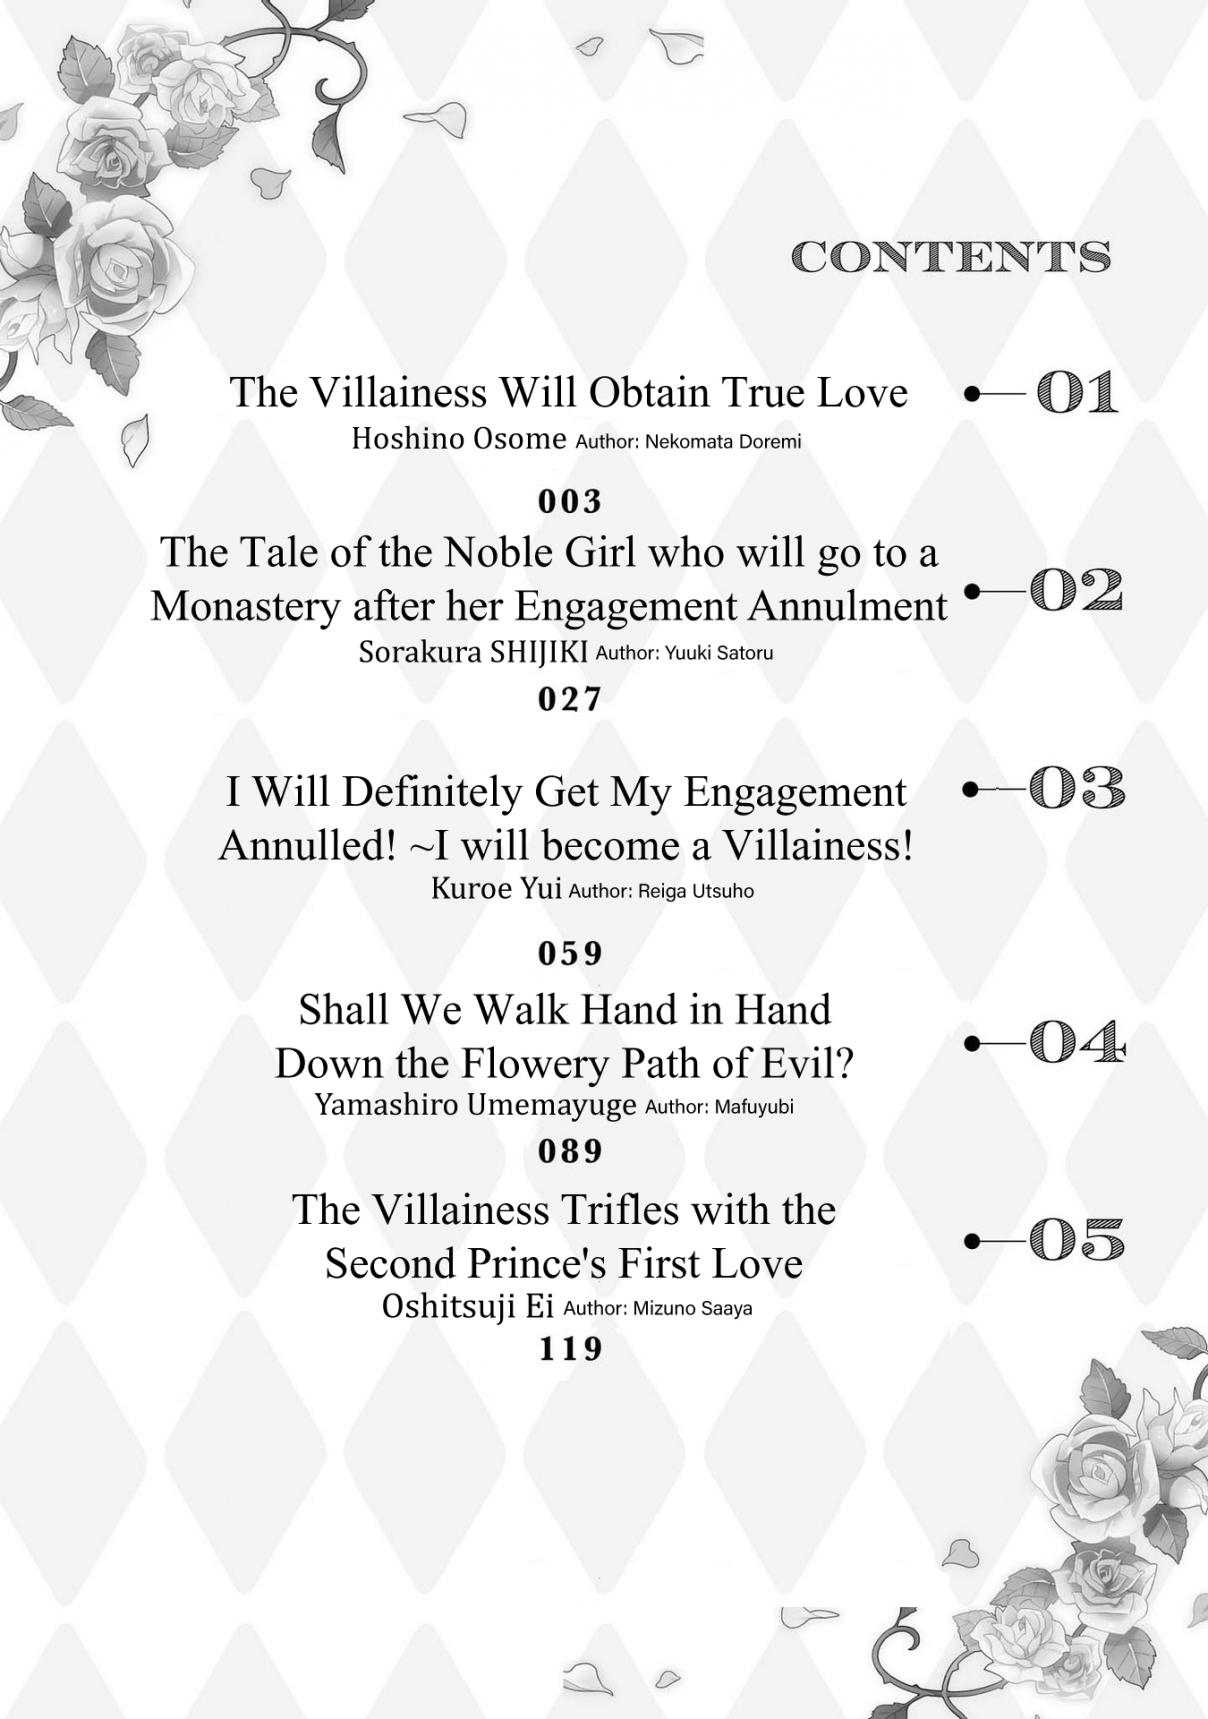 Though I May Be a Villainess, I'll Show You I Can Obtain Happiness! Vol. 1 Ch. 1 The Villainess Will Obtain True Love